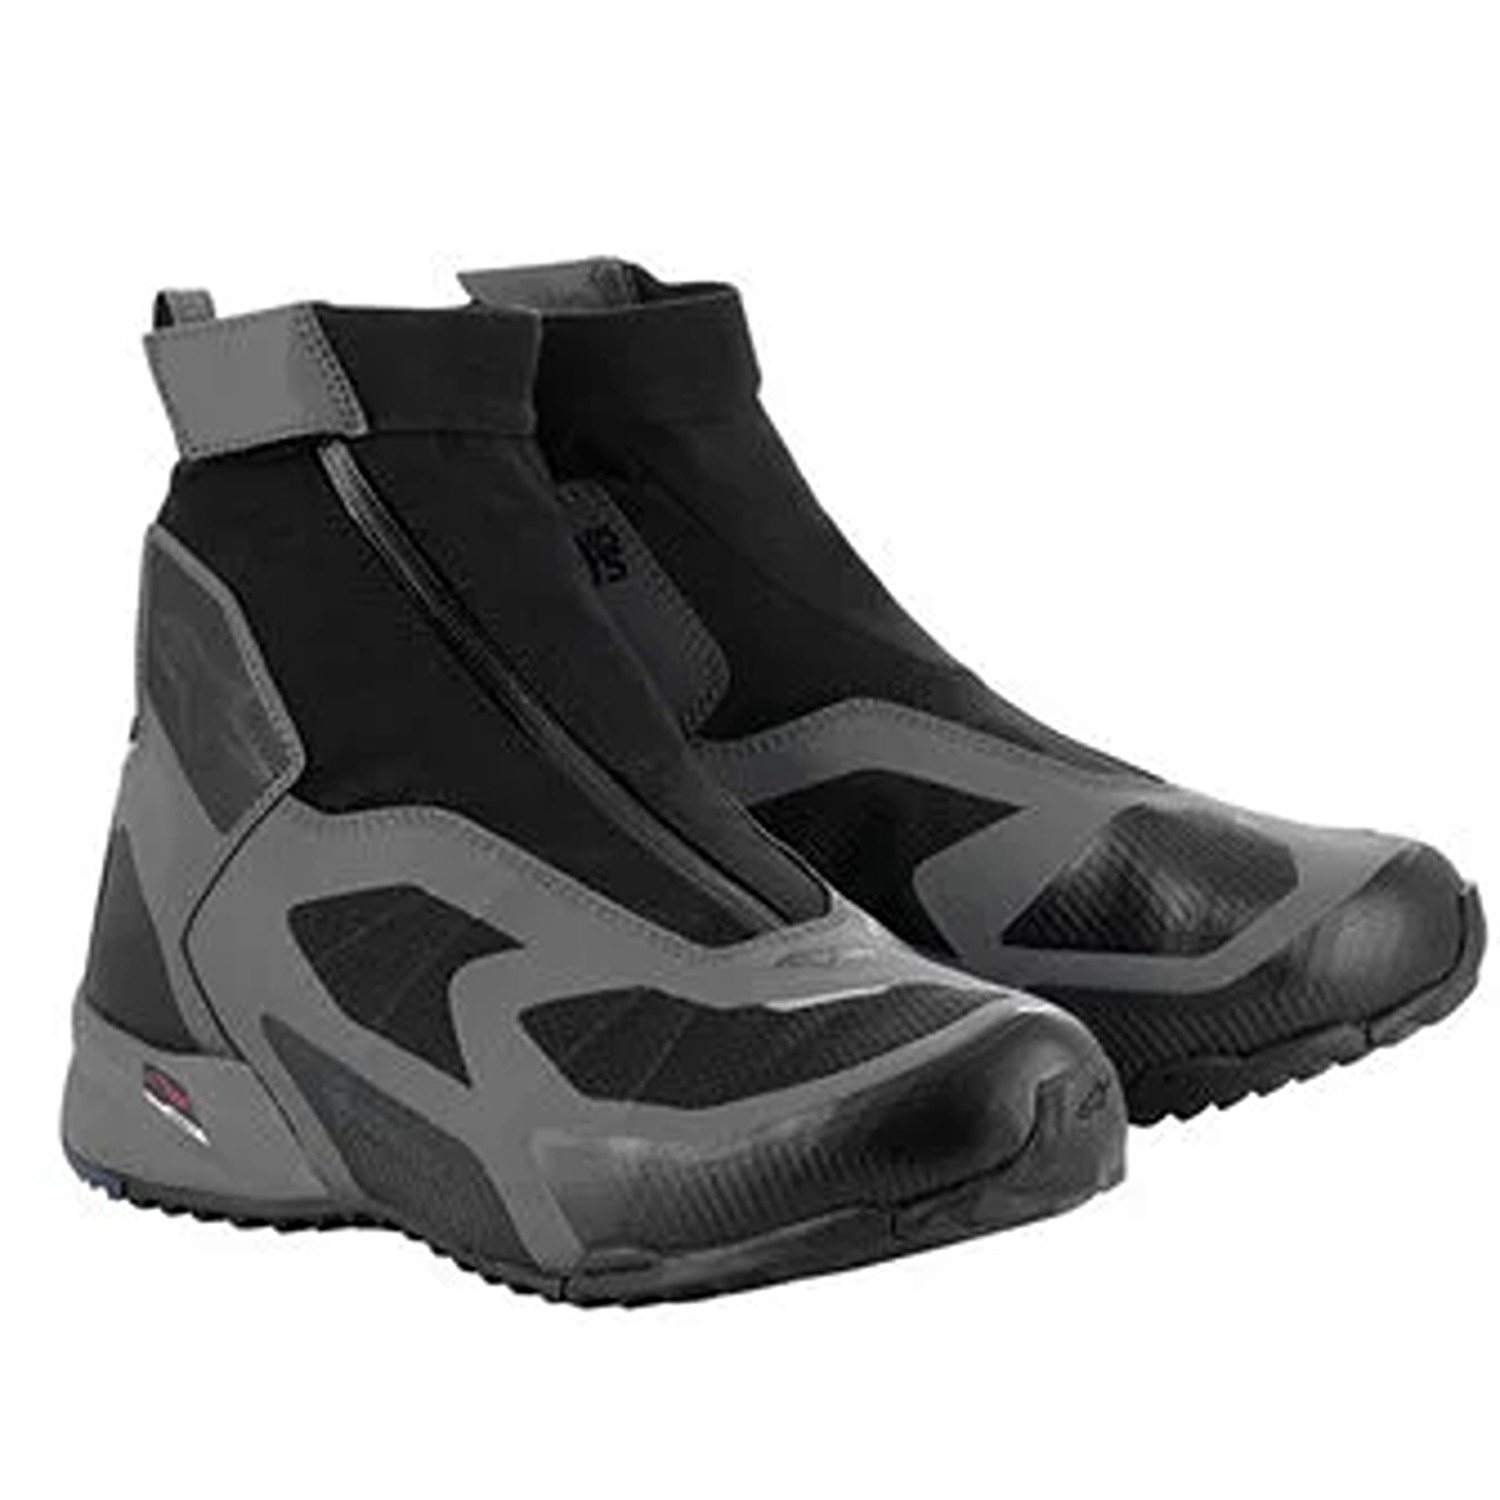 Image of EU Alpinestars CR-8 Gore-Tex Shoes Black Mid Gray Bright Red Taille US 13